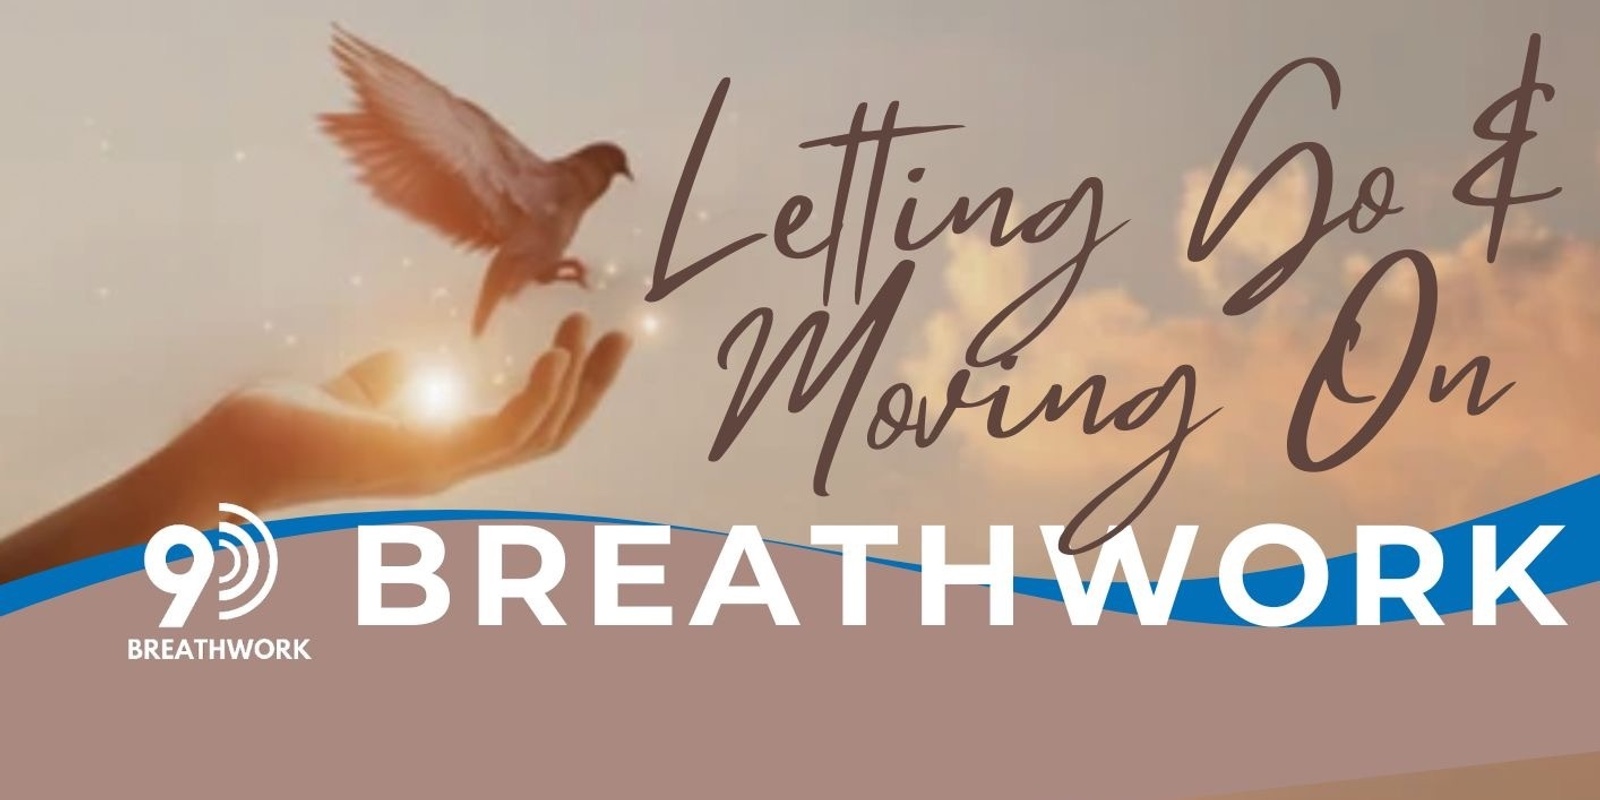 Banner image for 'Letting Go & Moving On' 9D Breathwork & Cacao - Charmhaven